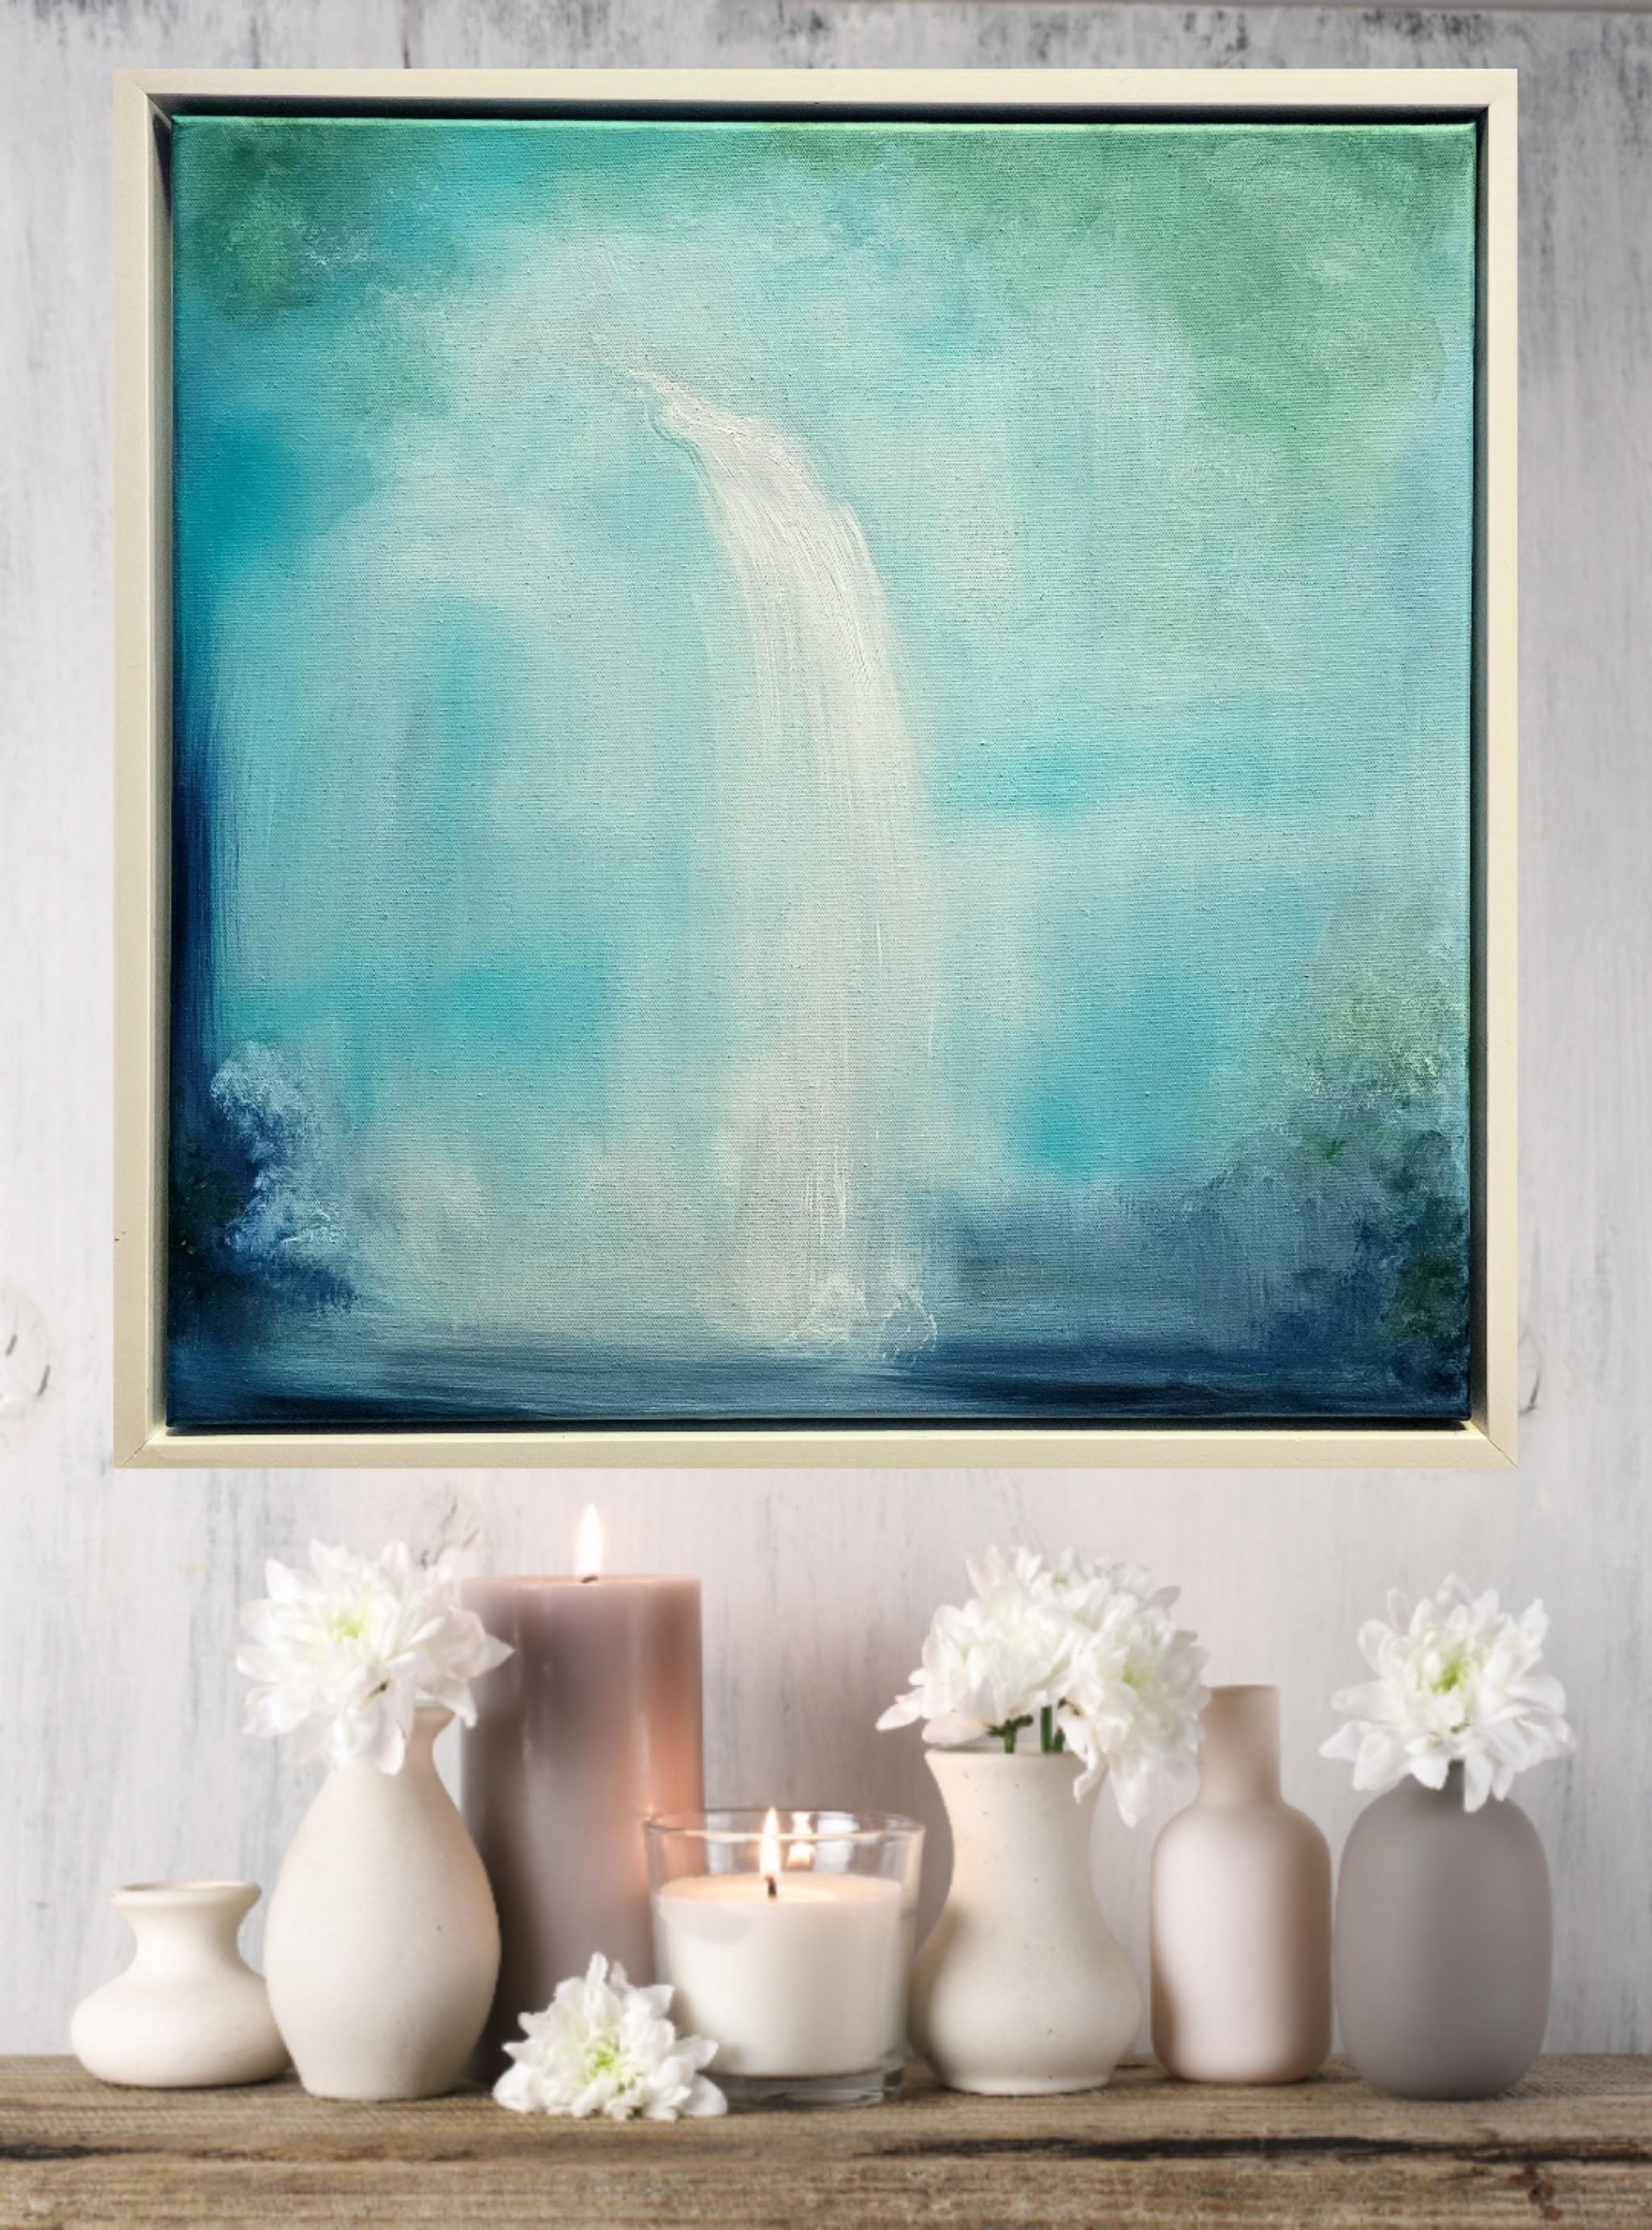 Wellspring is a dancing water interpretation, he new spring and rains creating new life and power in nature. In a beautiful palette of greens, blues, and yellows. A perfect size mounted in an elegant simple white floater frame.